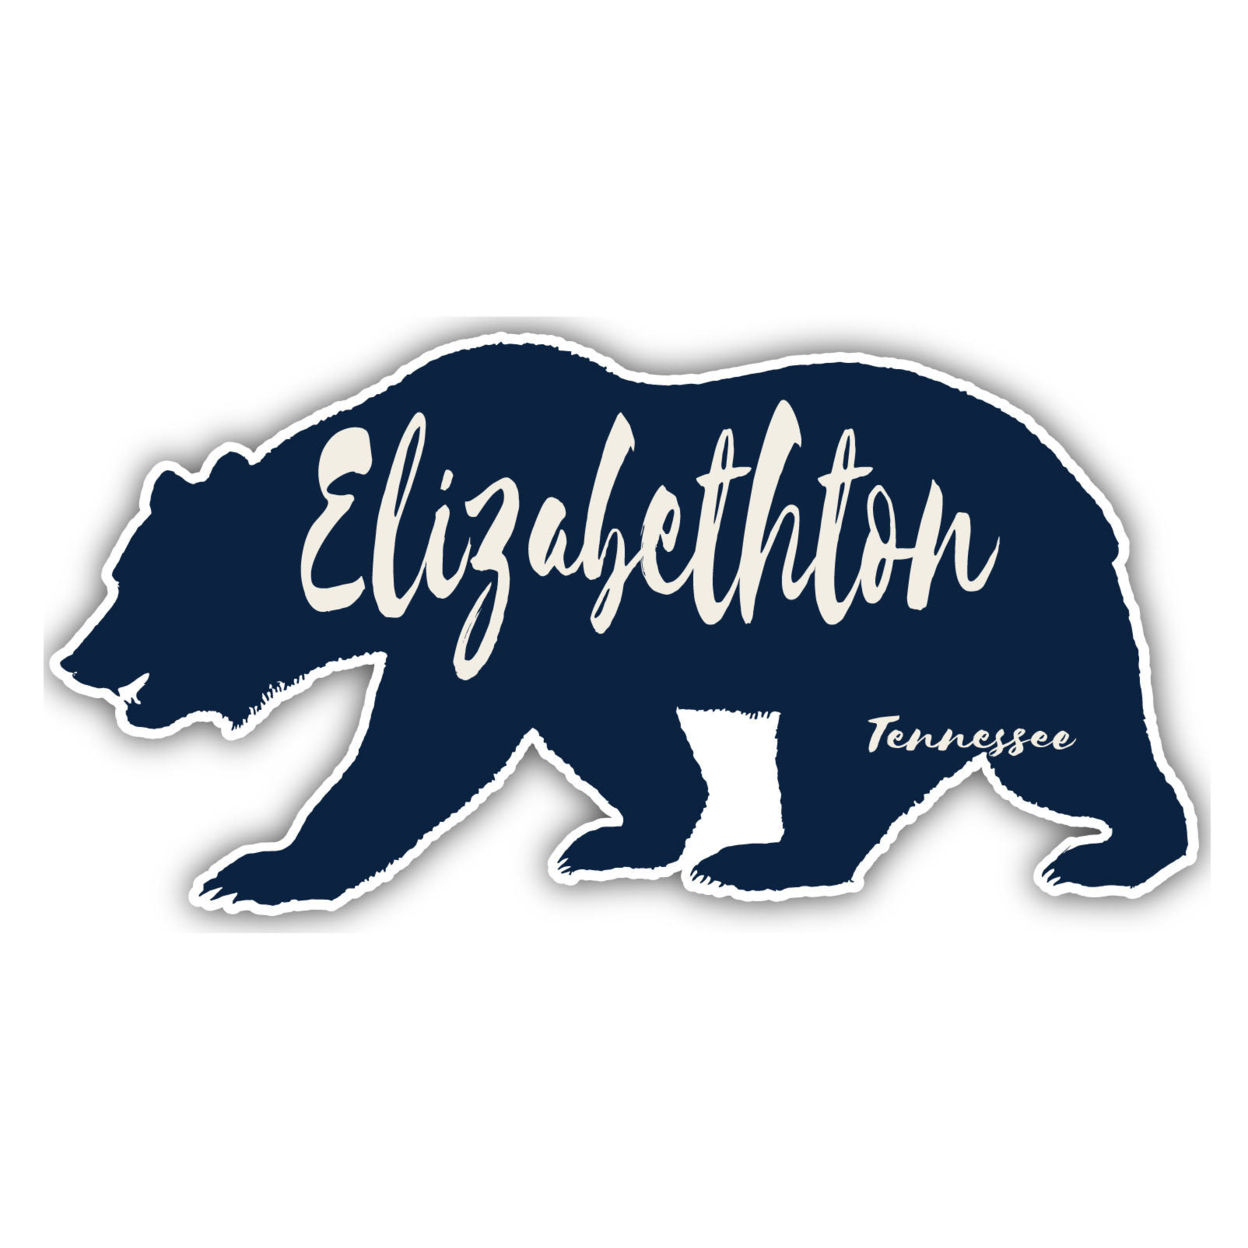 Elizabethton Tennessee Souvenir Decorative Stickers (Choose Theme And Size) - 4-Pack, 6-Inch, Bear